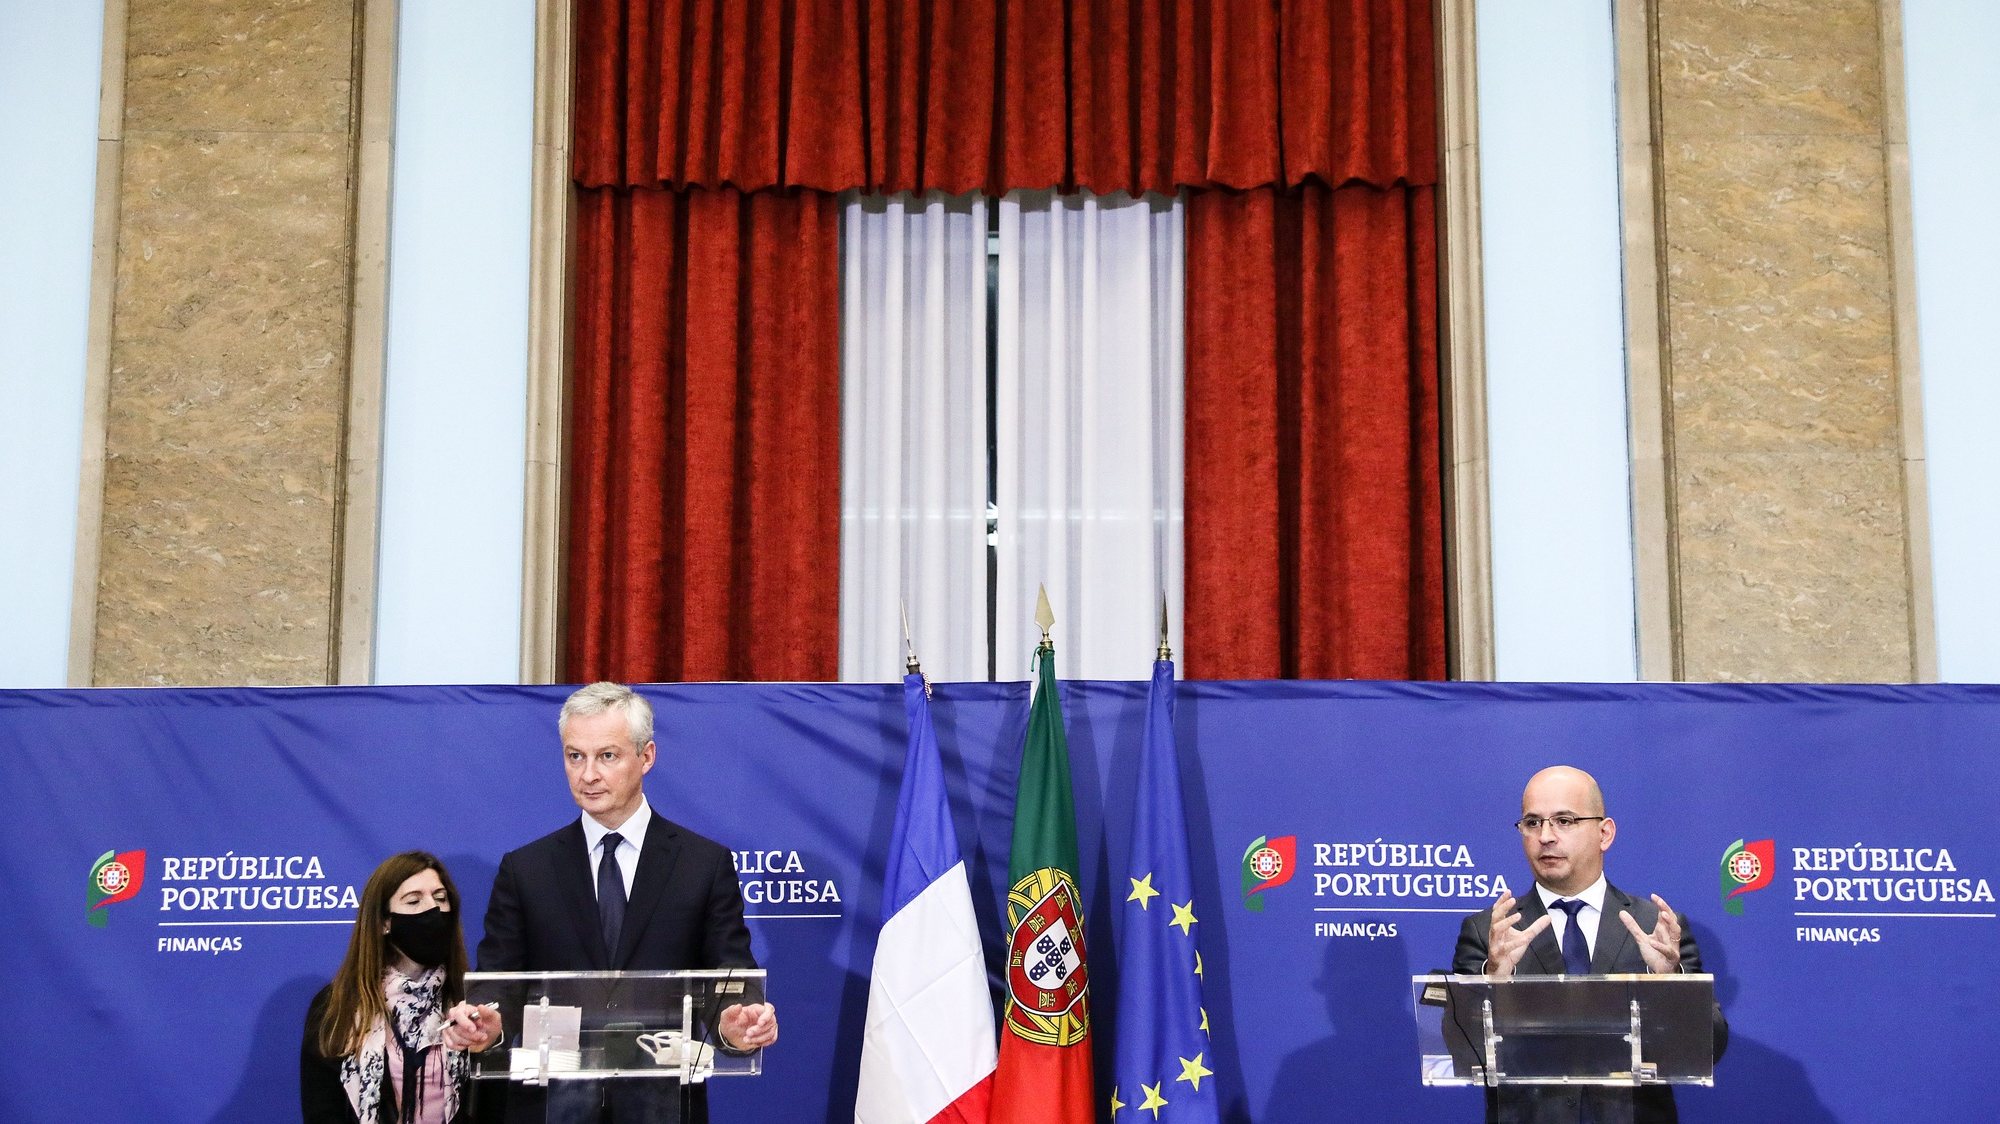 French Economy and Finance minister, Bruno Le Maire (L), during the press conference after his meeting with his Portuguese counterpart, Joao Leao (R), at the Finance ministry in downtown Lisbon, Portugal, 03rd November 2020. TIAGO PETINGA/LUSA